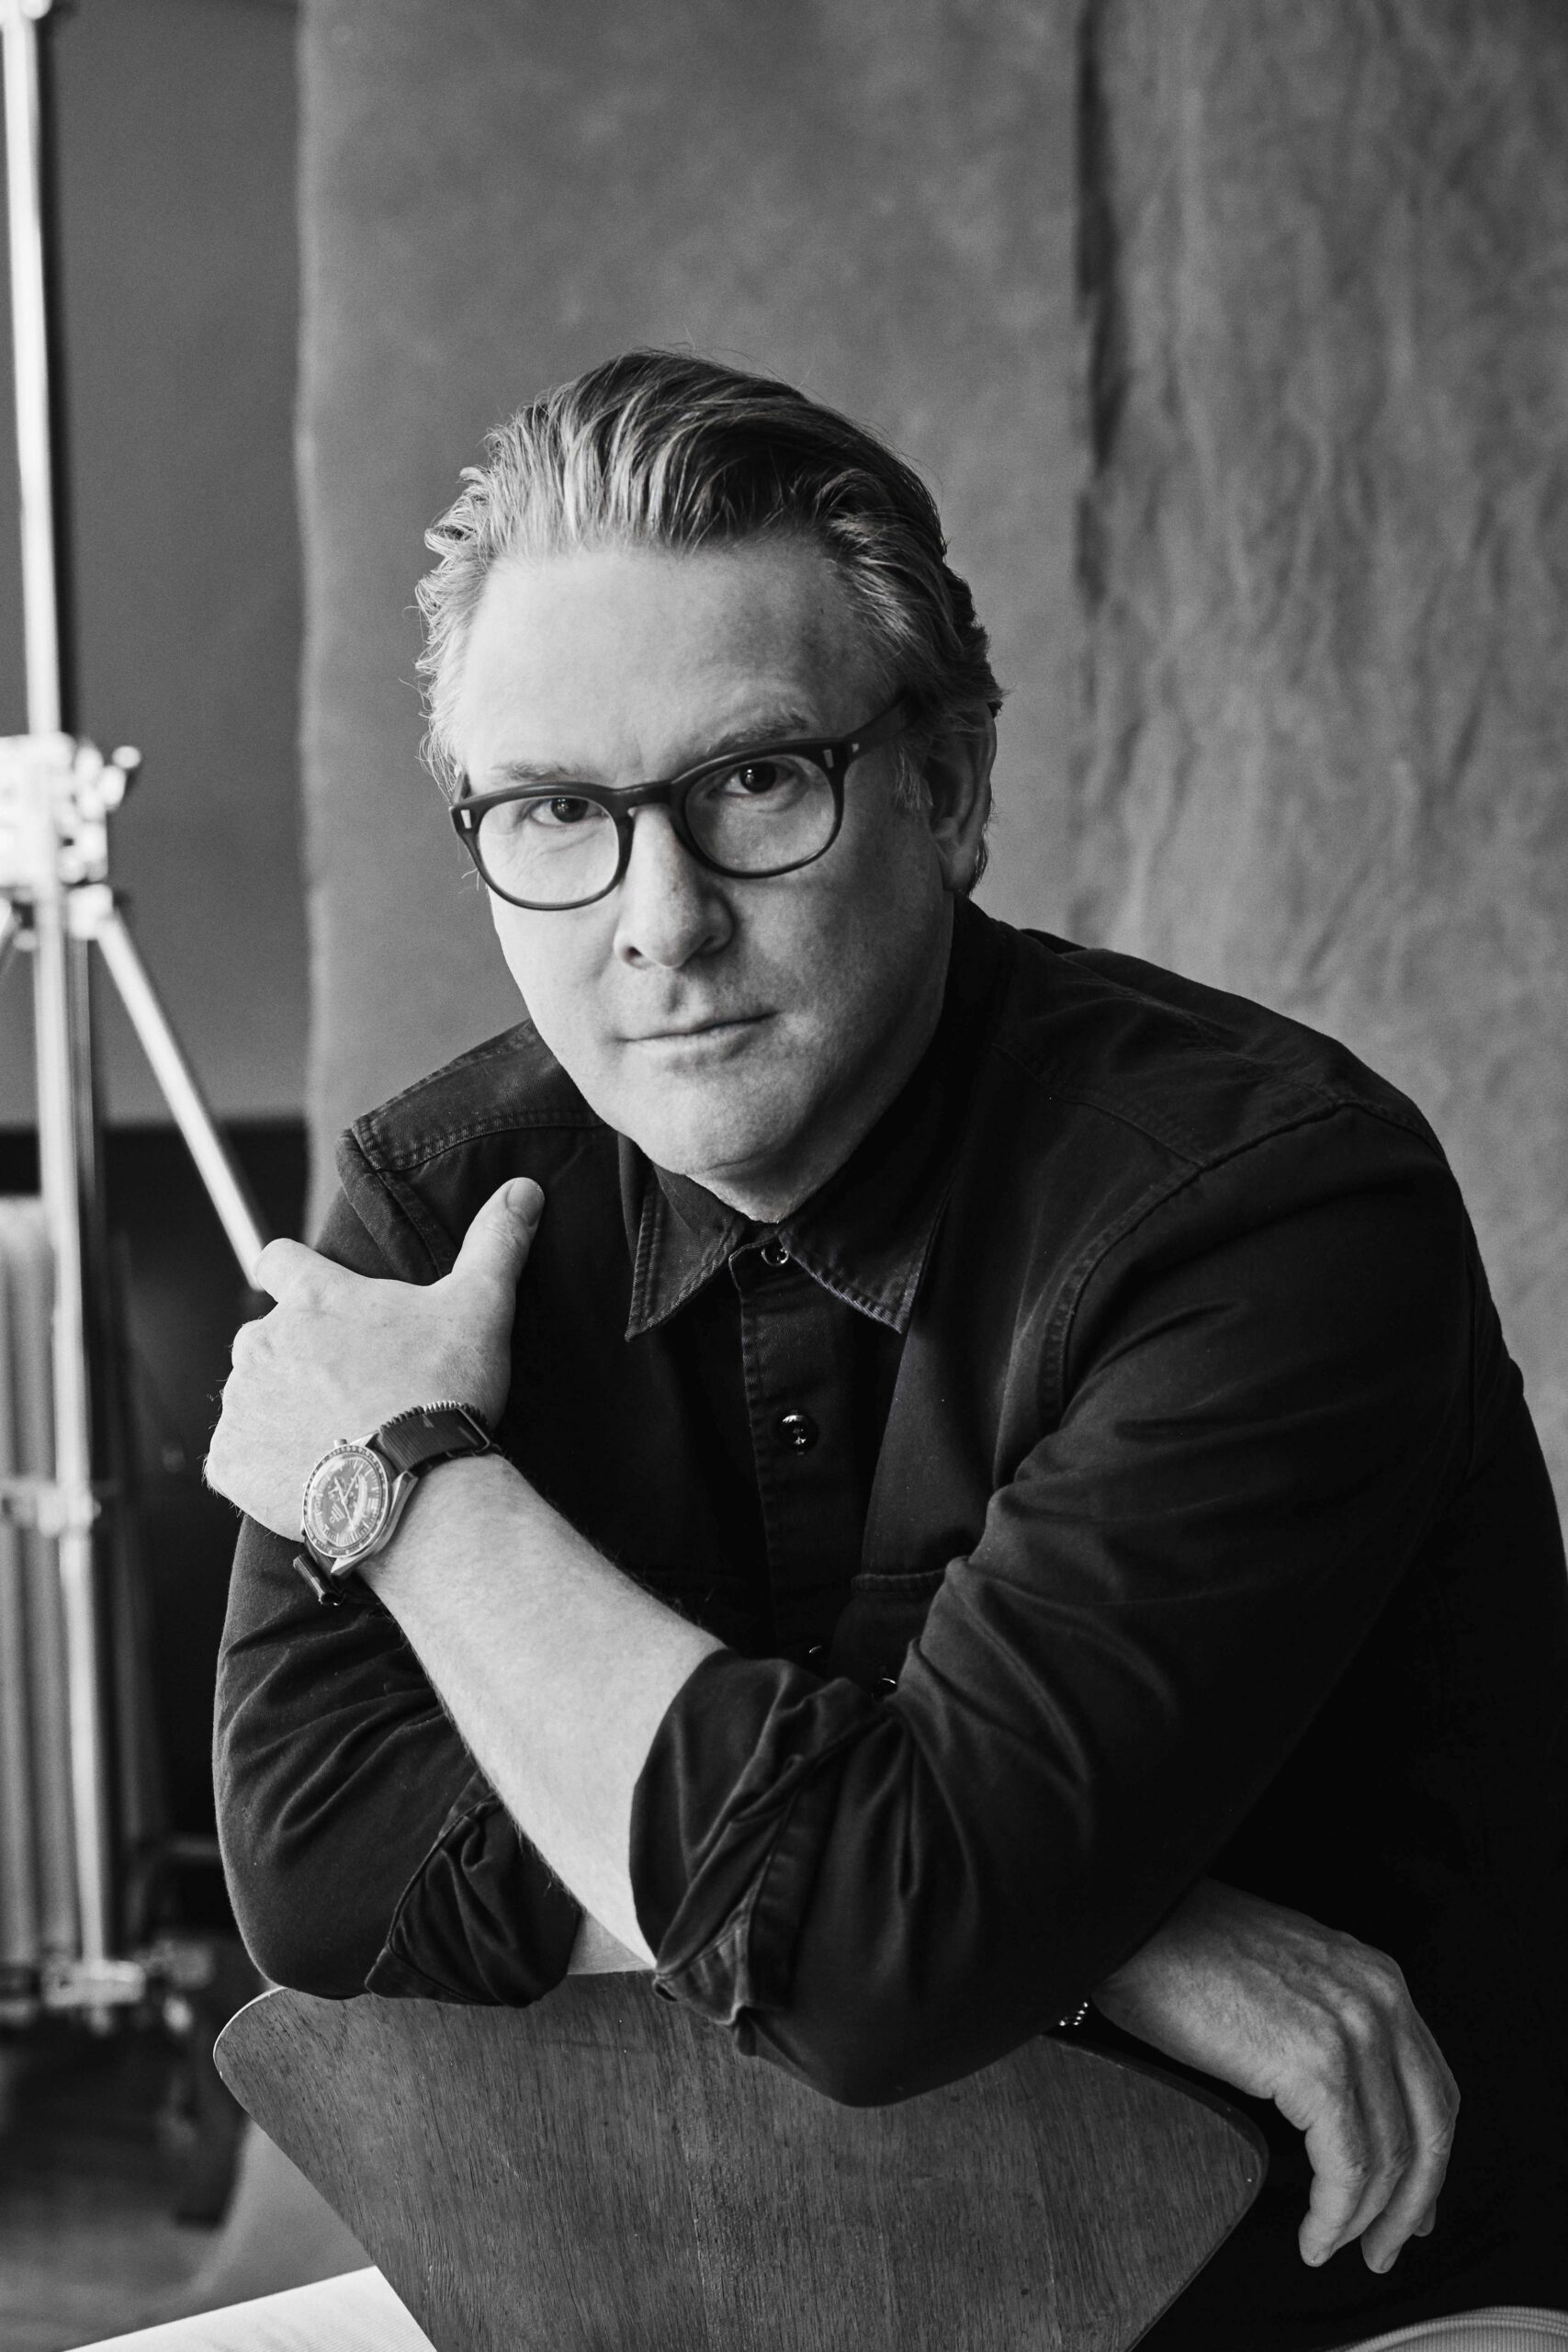 A black and white portrait of Todd Snyder with glasses, wearing a dark shirt and a watch, resting his chin on his hand.